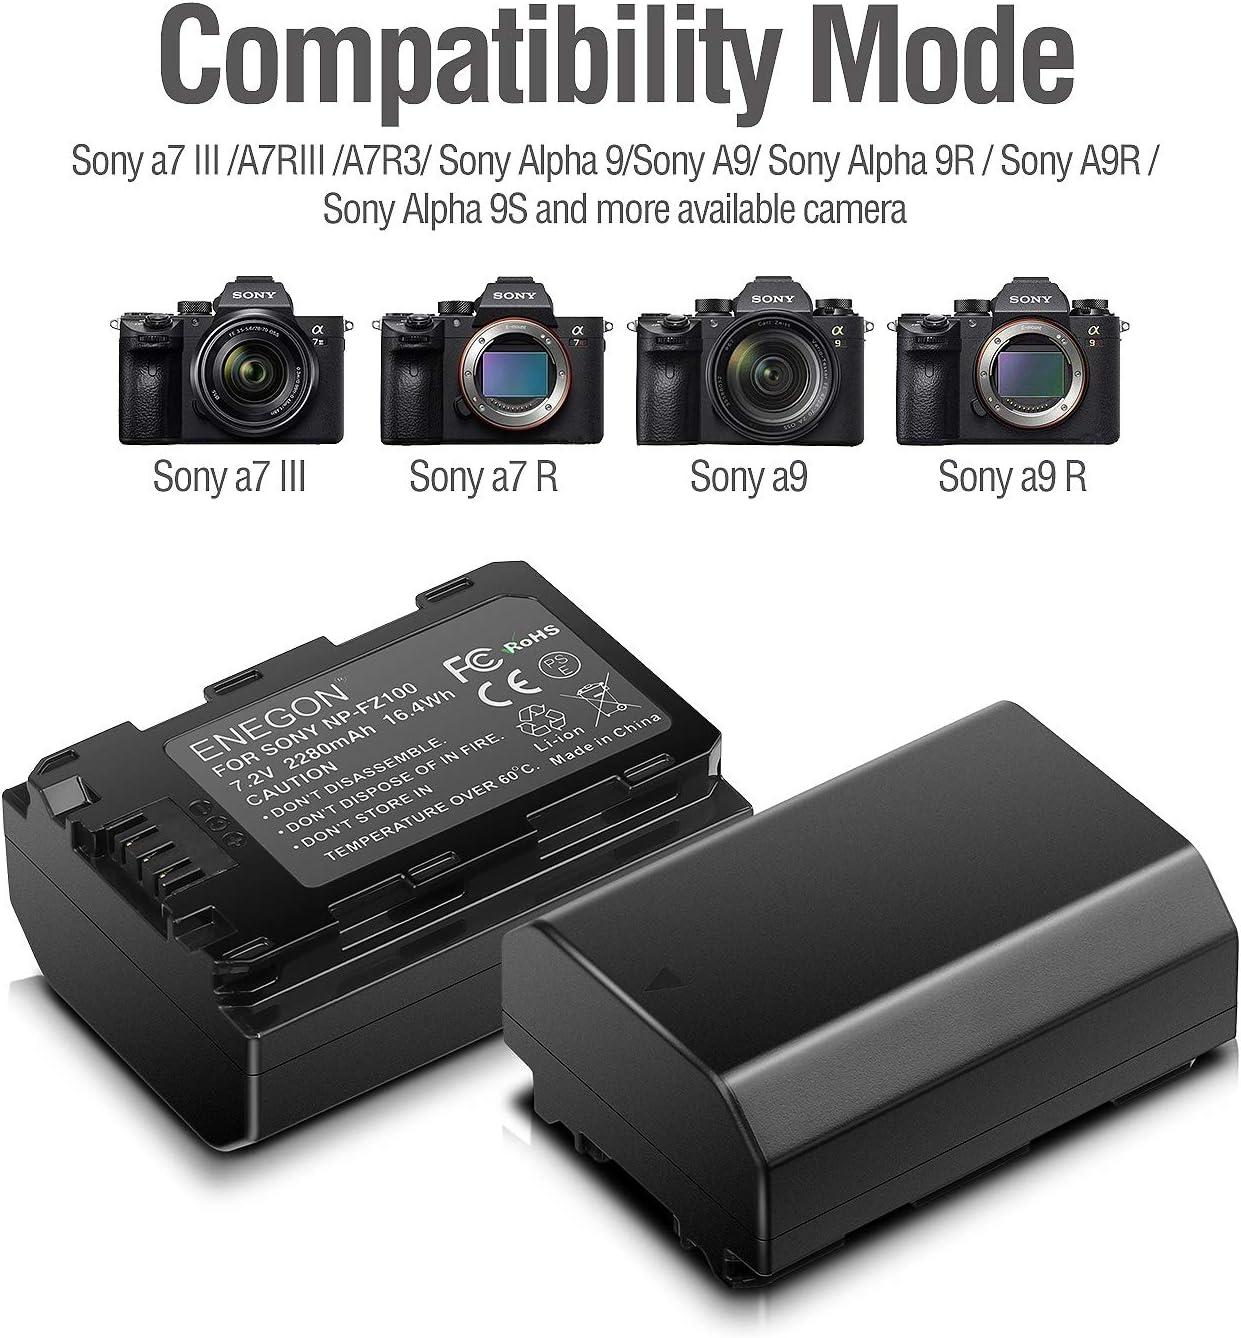 Three Pieces Sony NP-FZ100 Rechargeable Lithium-Ion Battery 2280mAh for  Alpha A7 III, A7R III, A9 Digital Cameras